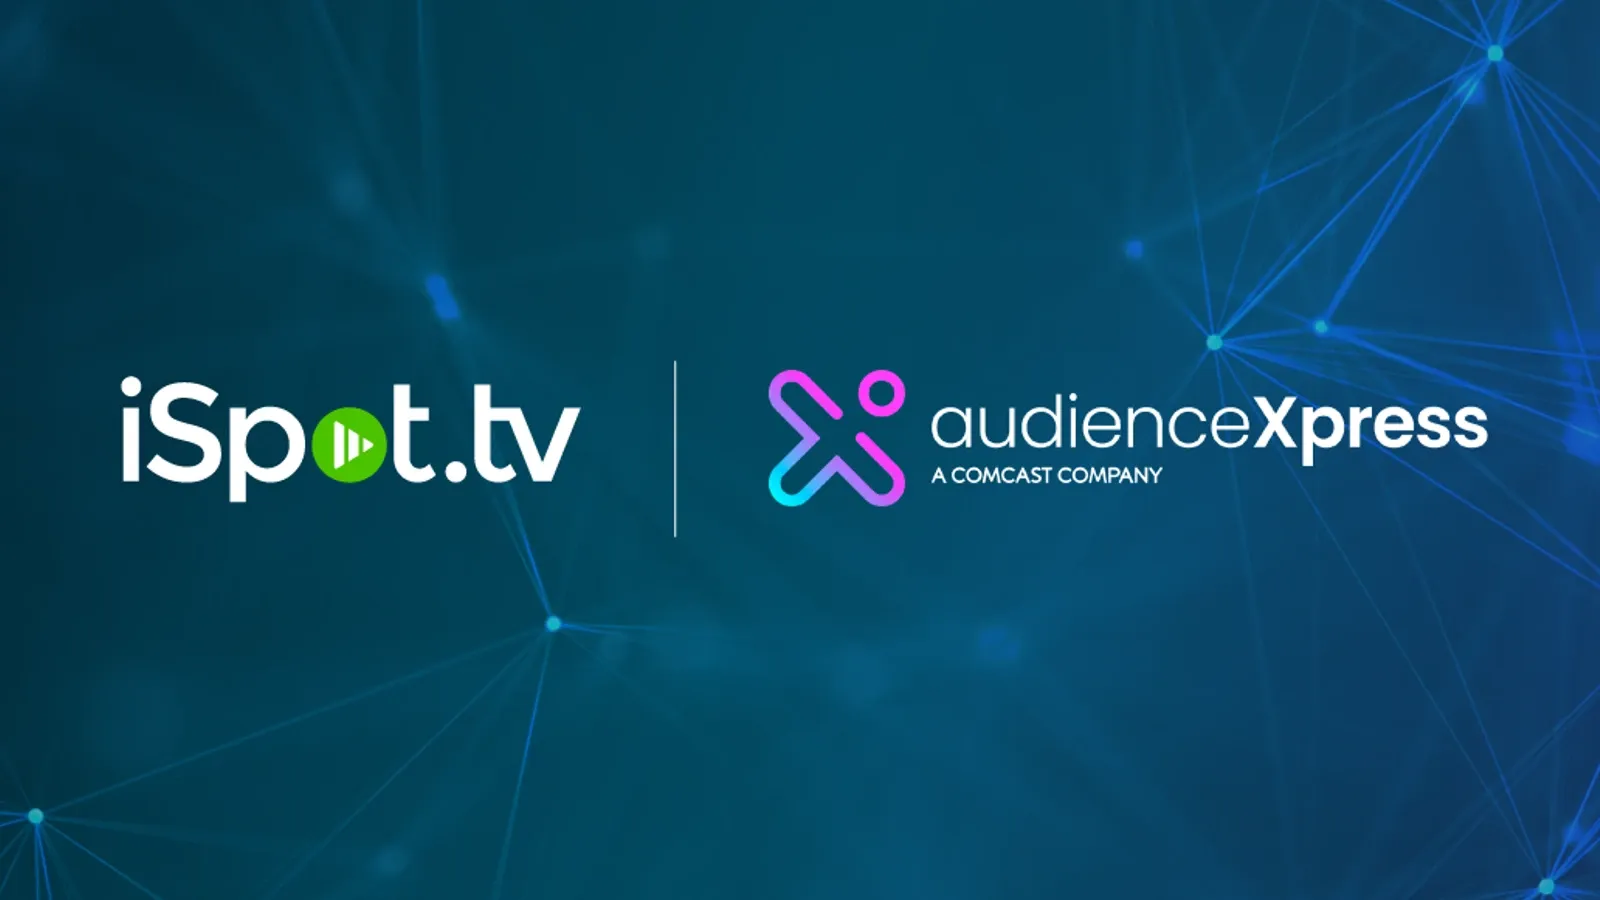 iSpot and Comcast’s AudienceXpress